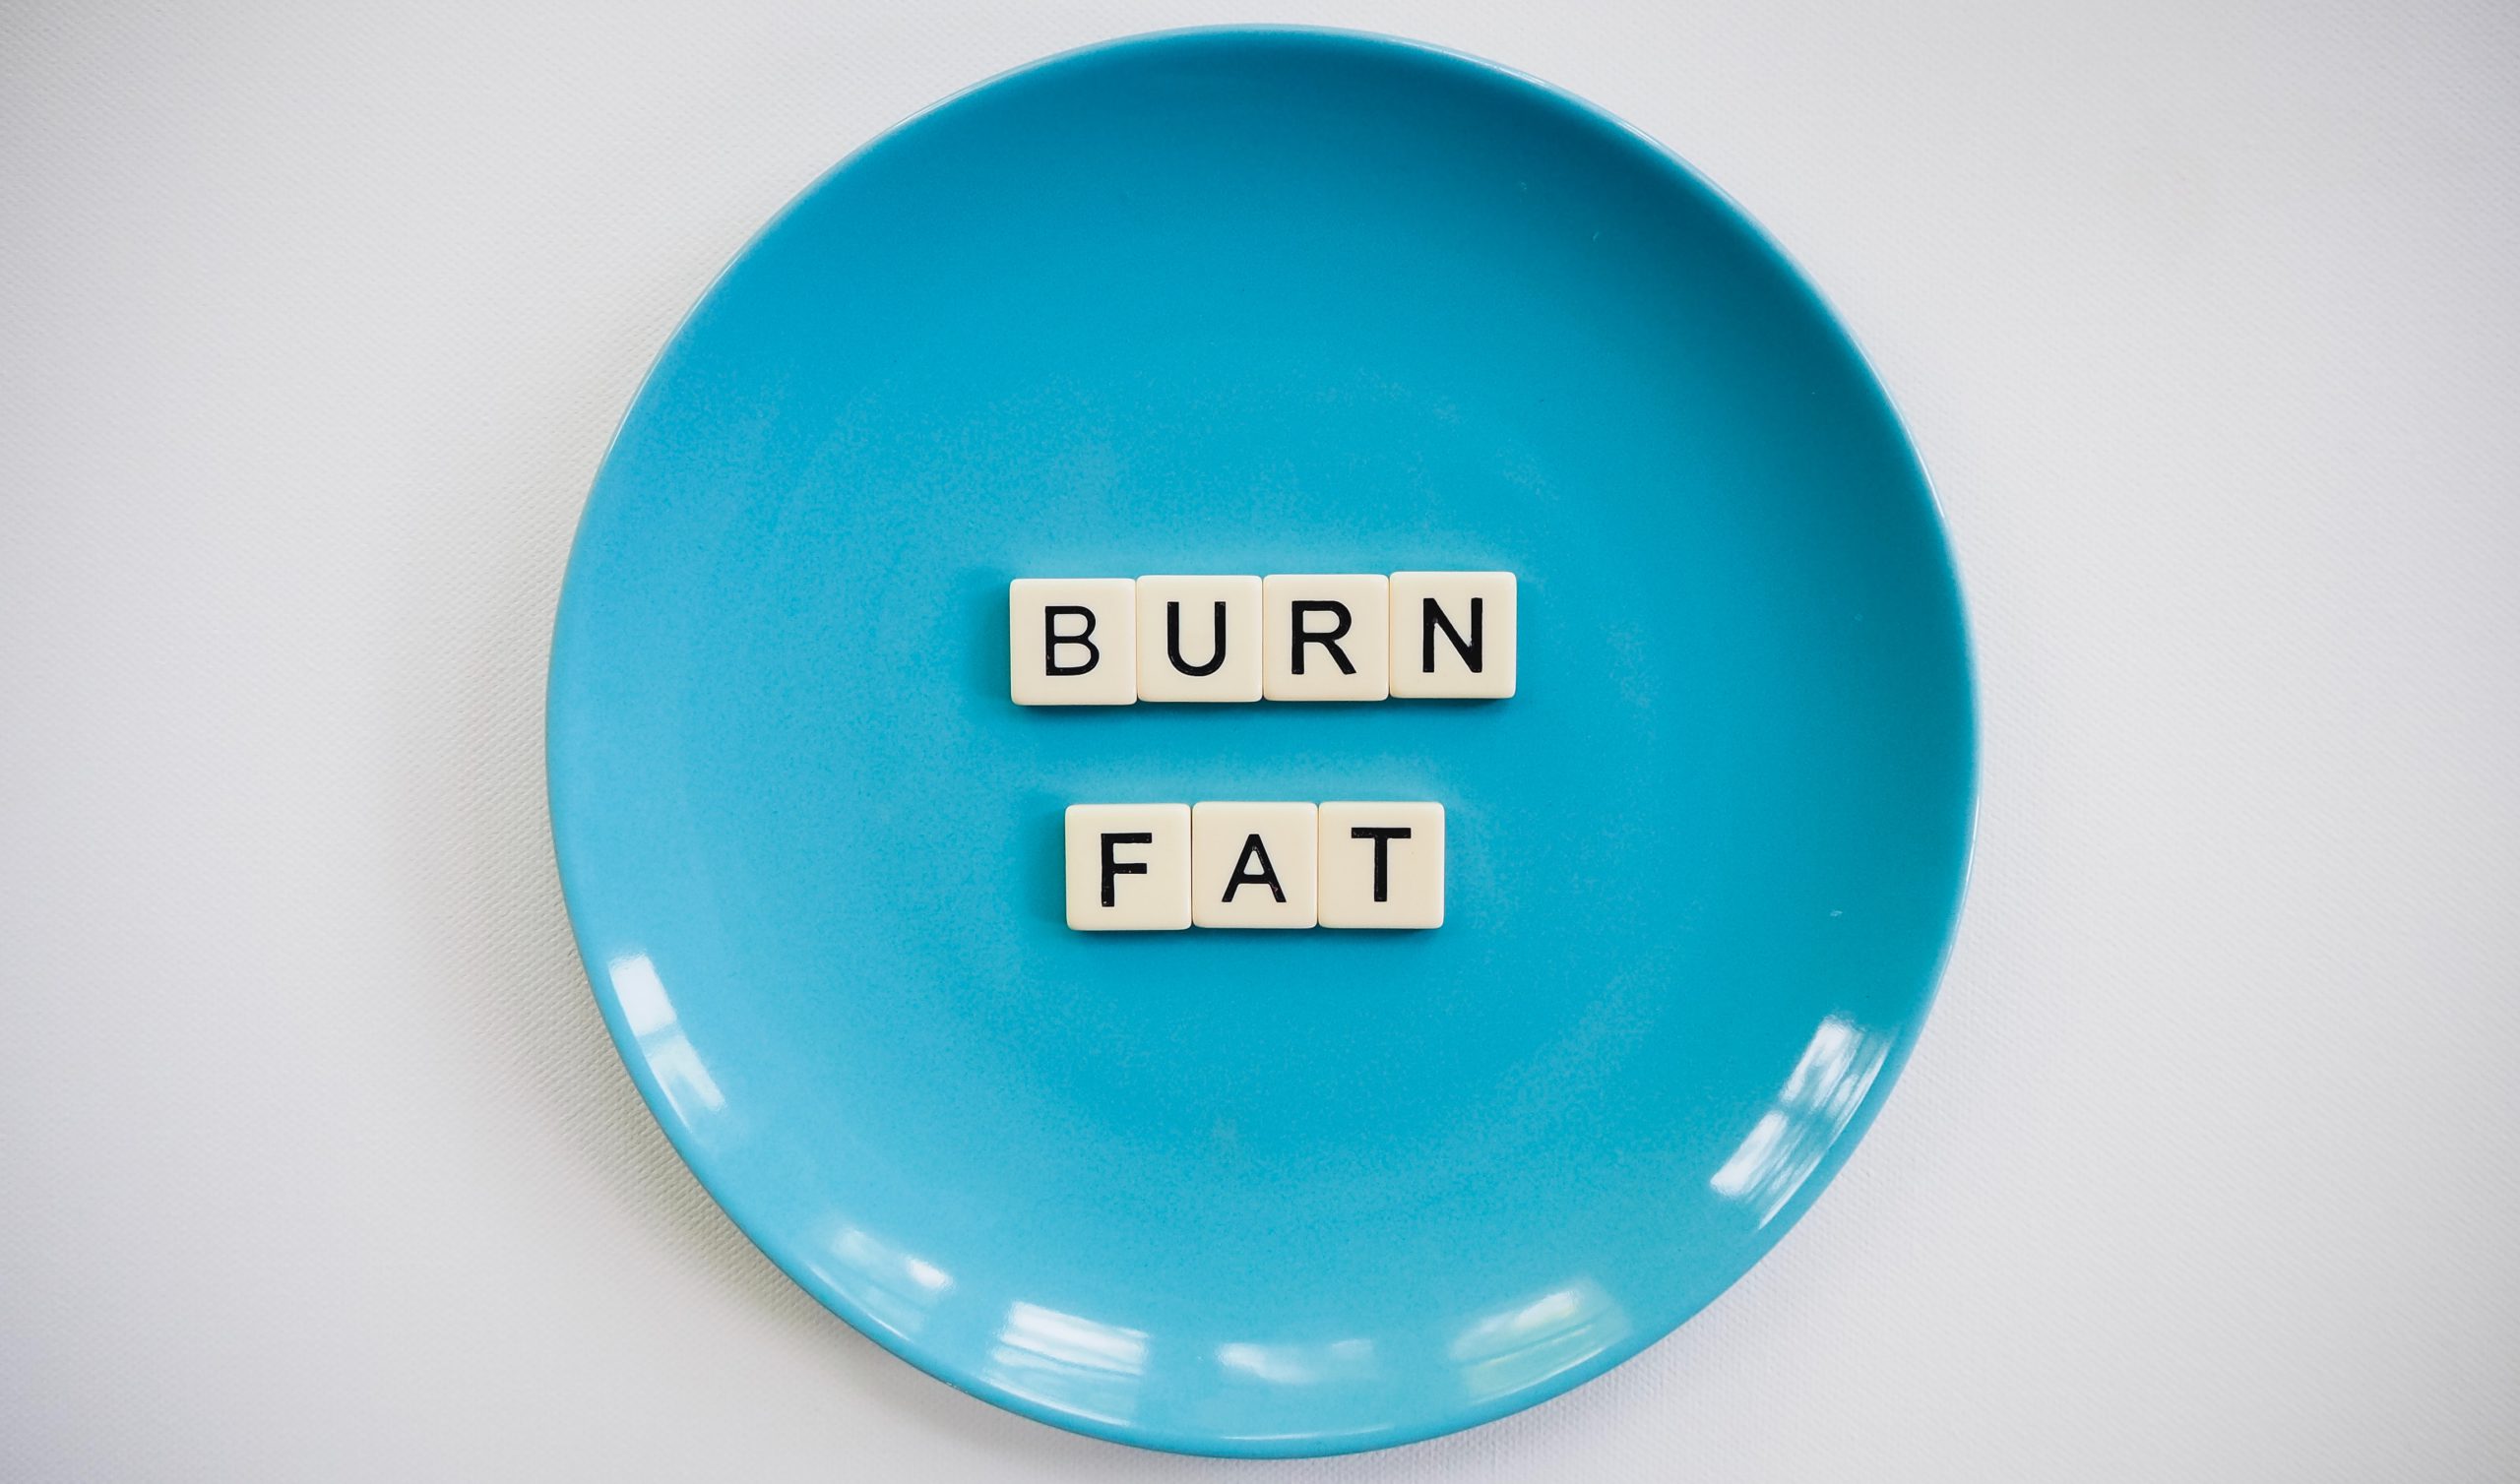 Burning fat – why and how?